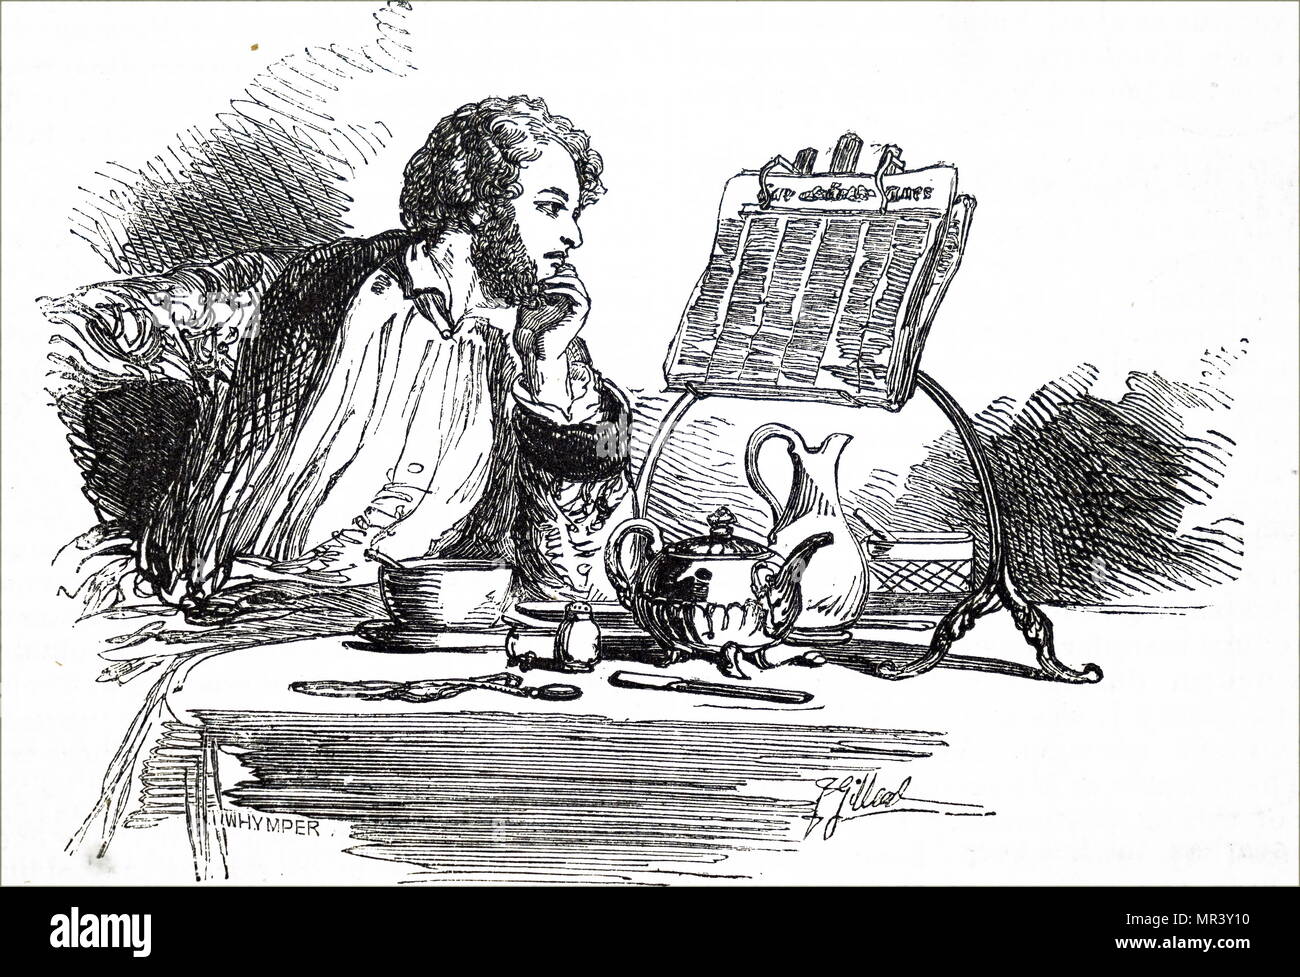 Illustration depicting the Iris Invalid's Reading Desk invented by Captain Twopenny. Dated 19th century Stock Photo